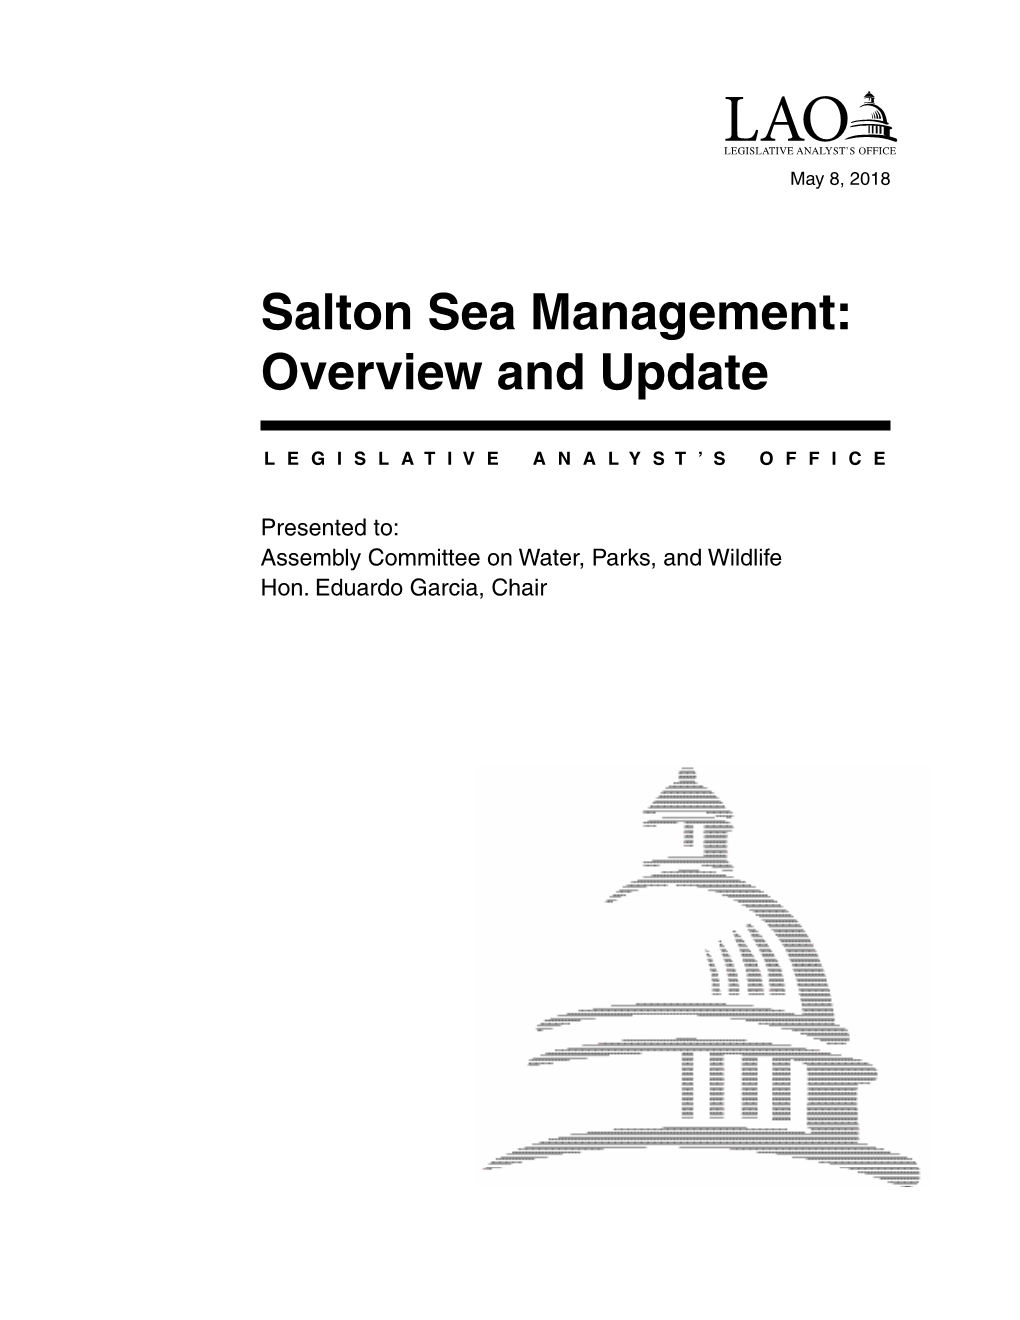 Salton Sea Management: Overview and Update